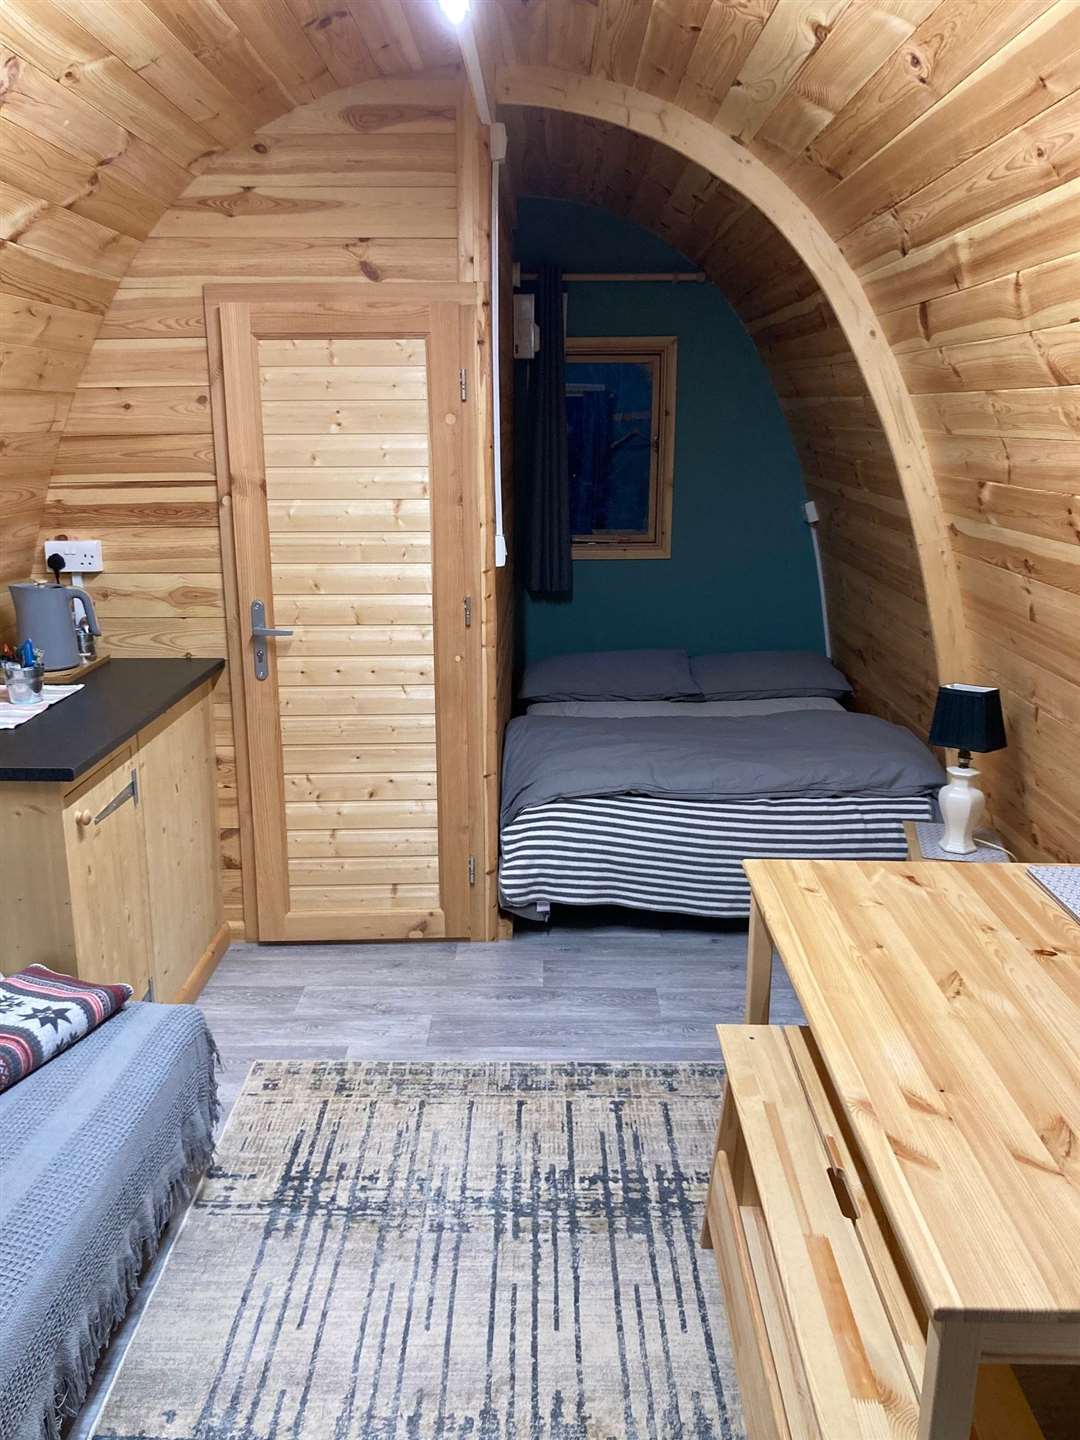 The cosy glamping pods at The Woolpack Inn in Yalding